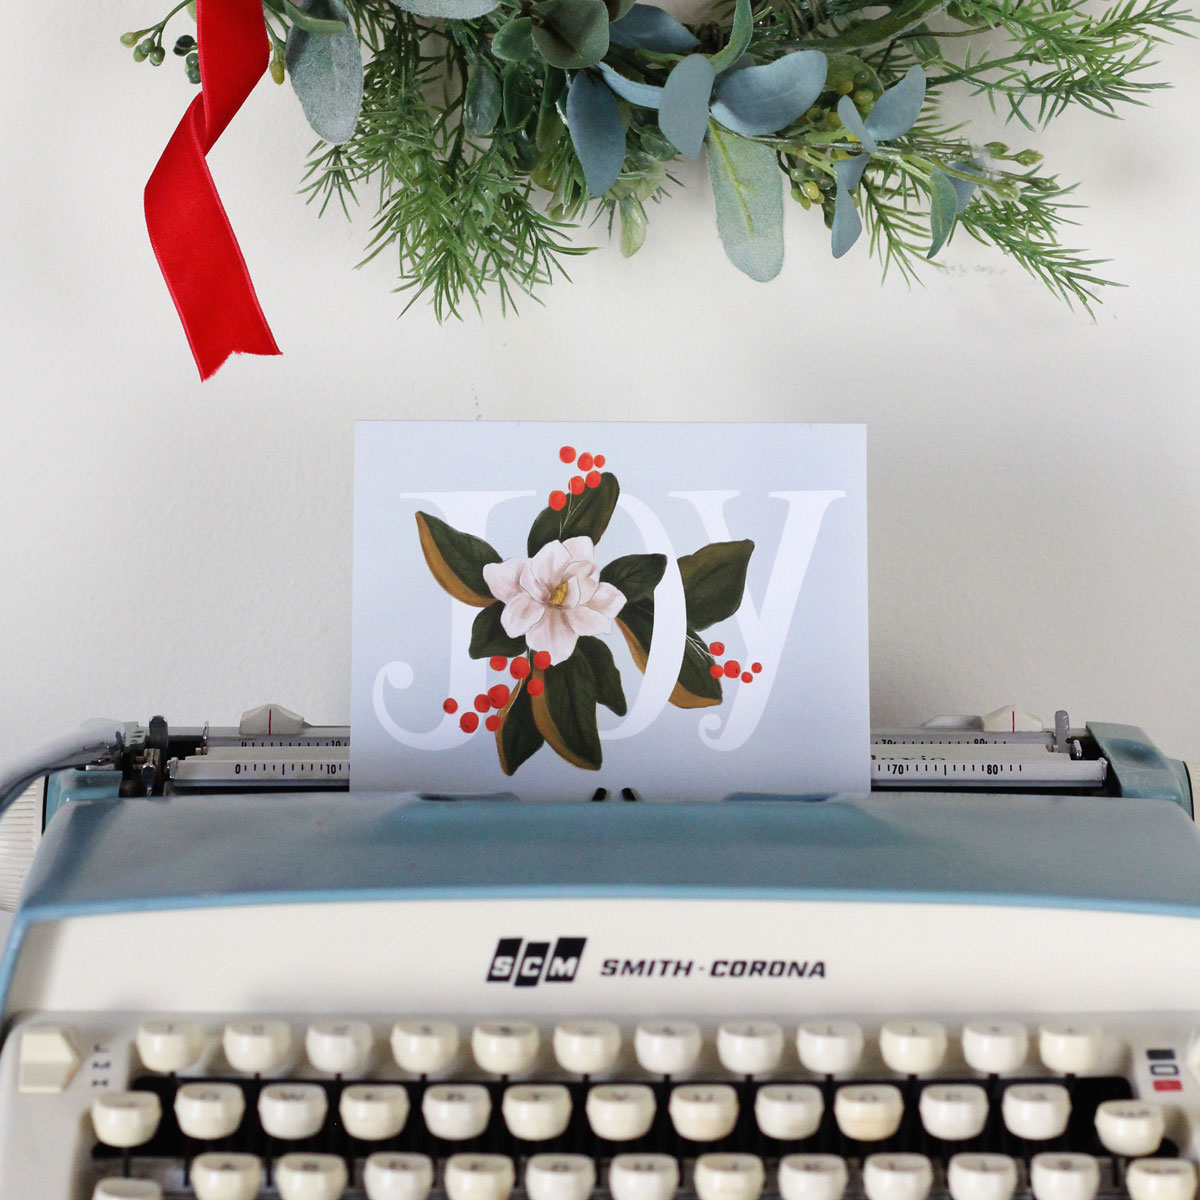 A mid-century modern holiday collection of hand-drawn prints & cards from Lily & Val